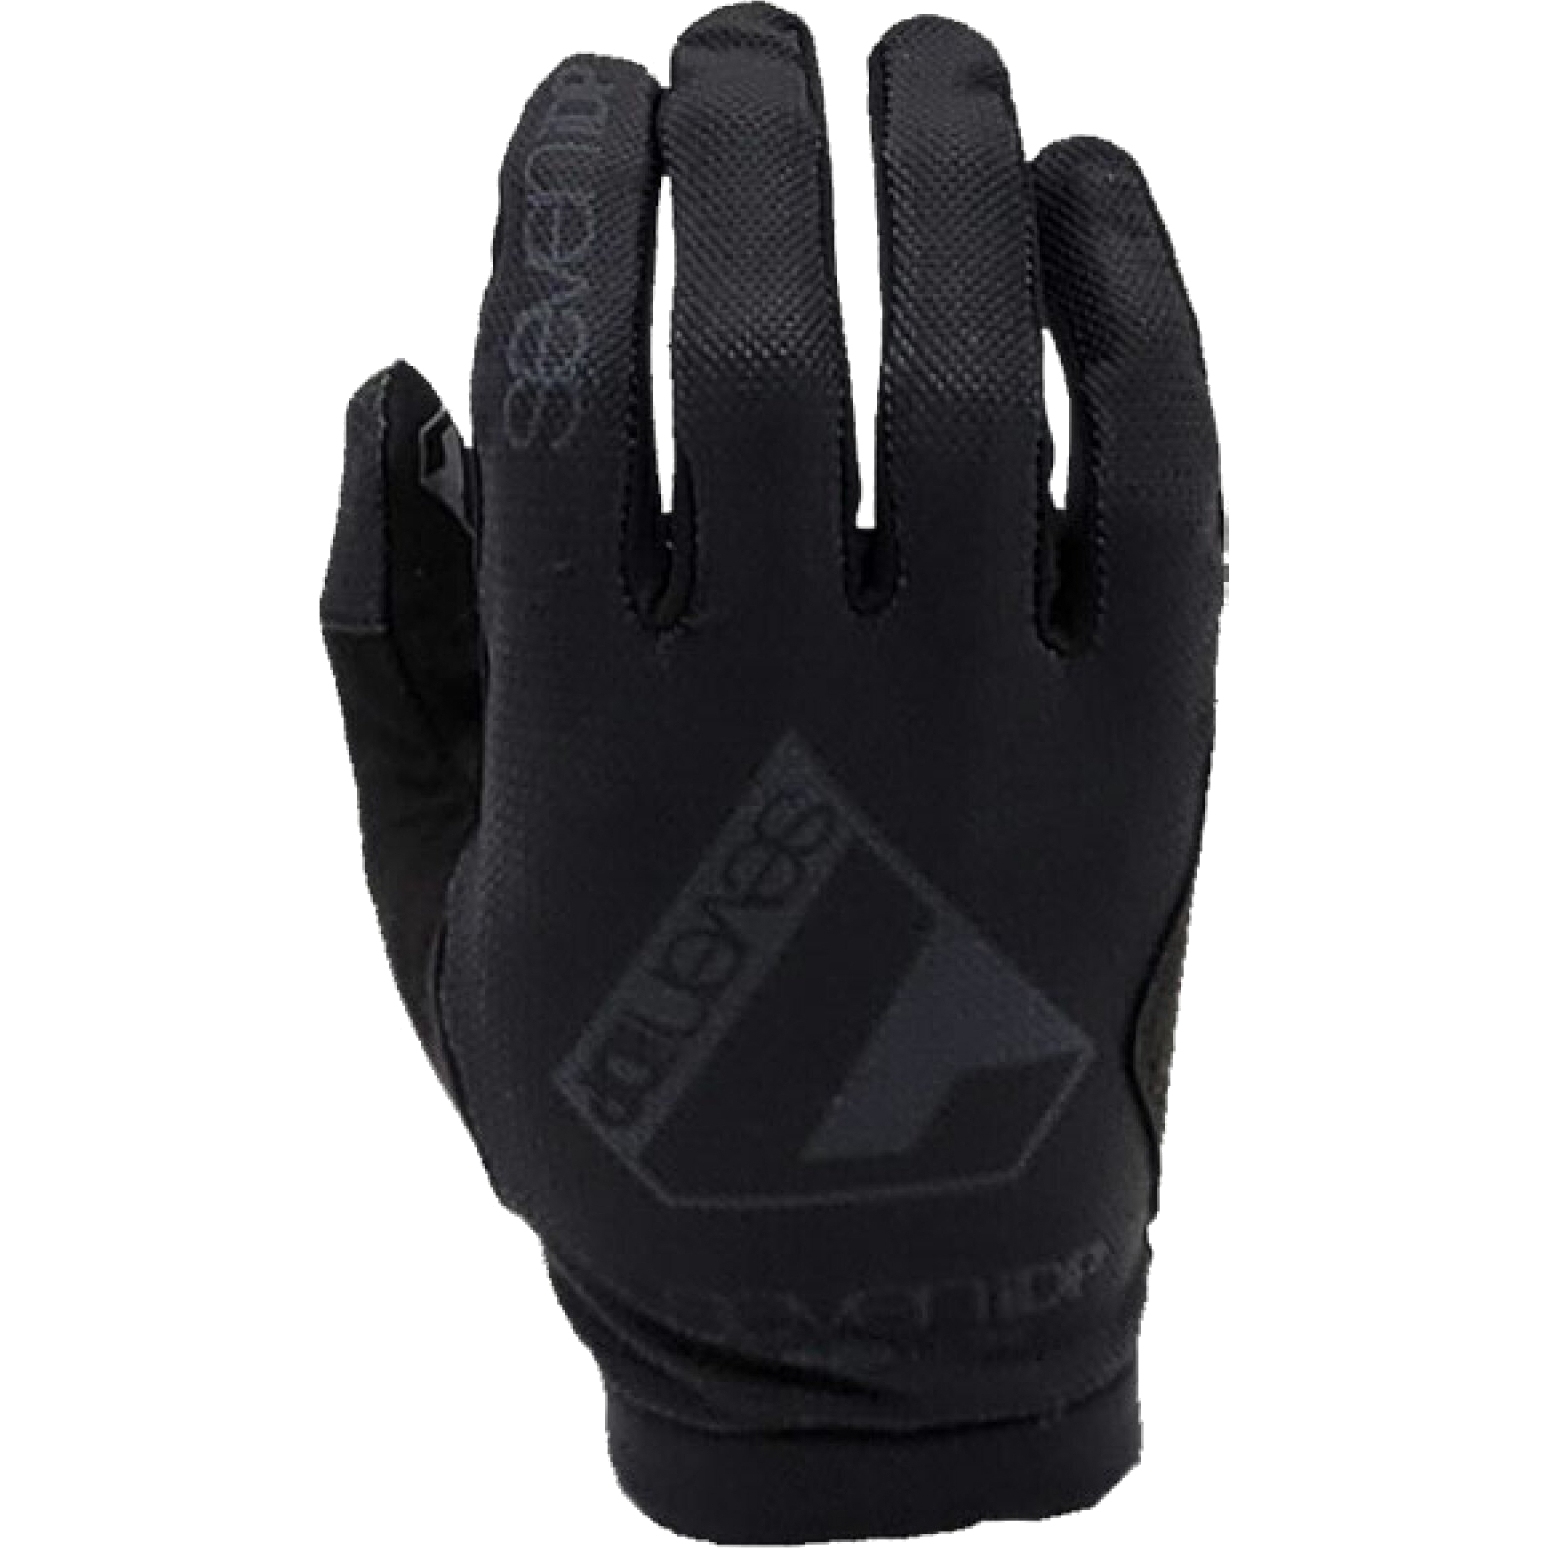 Picture of 7 Protection 7iDP Transition Gloves - black